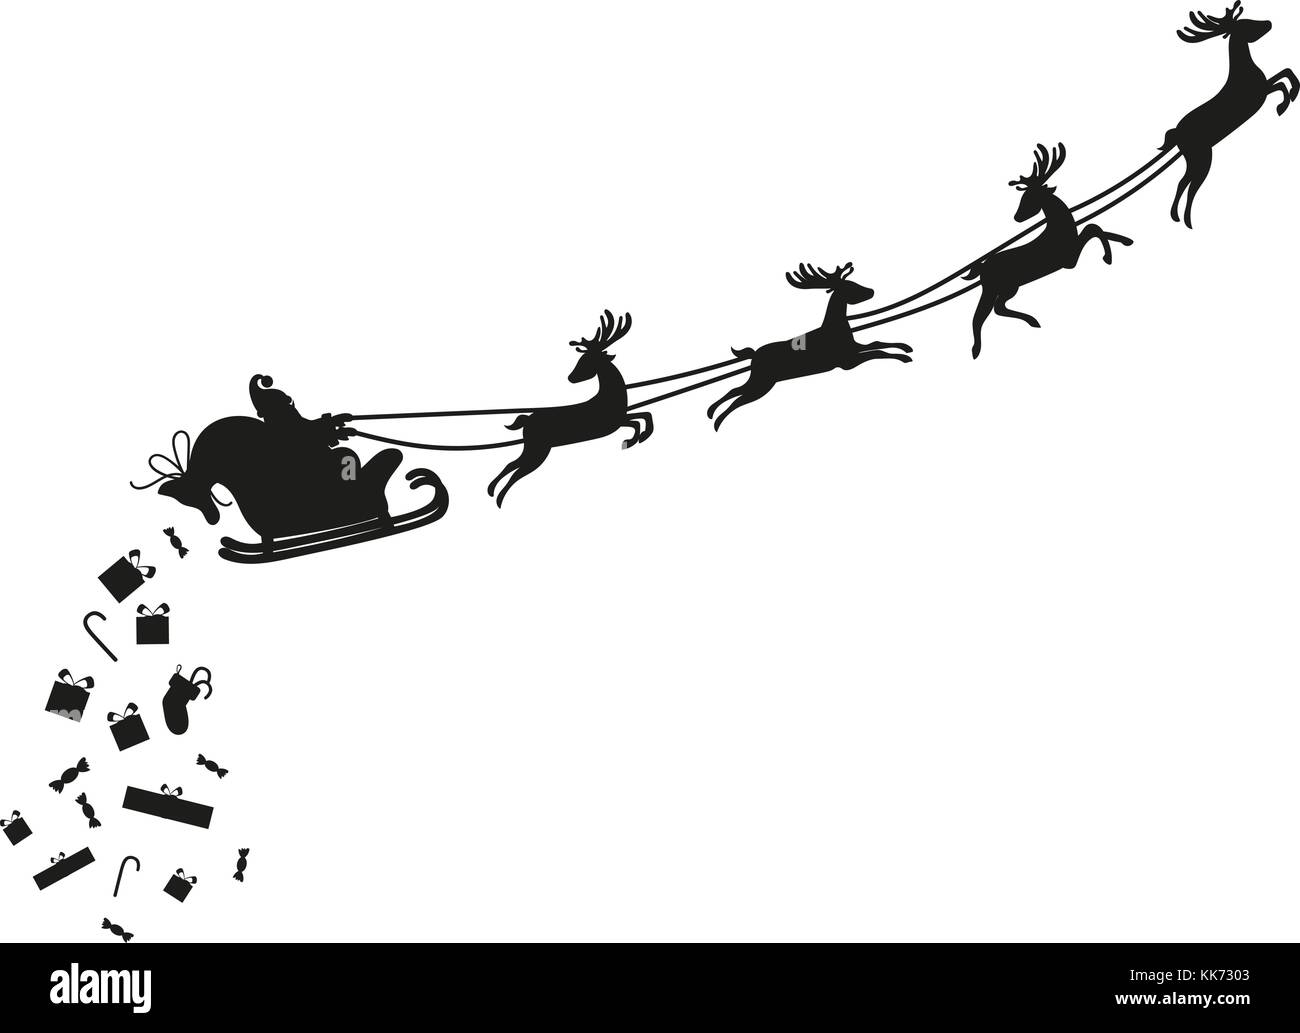 Santa Claus flying with deer and drops presents. Black silhouette on white background. Vector illustration Stock Vector